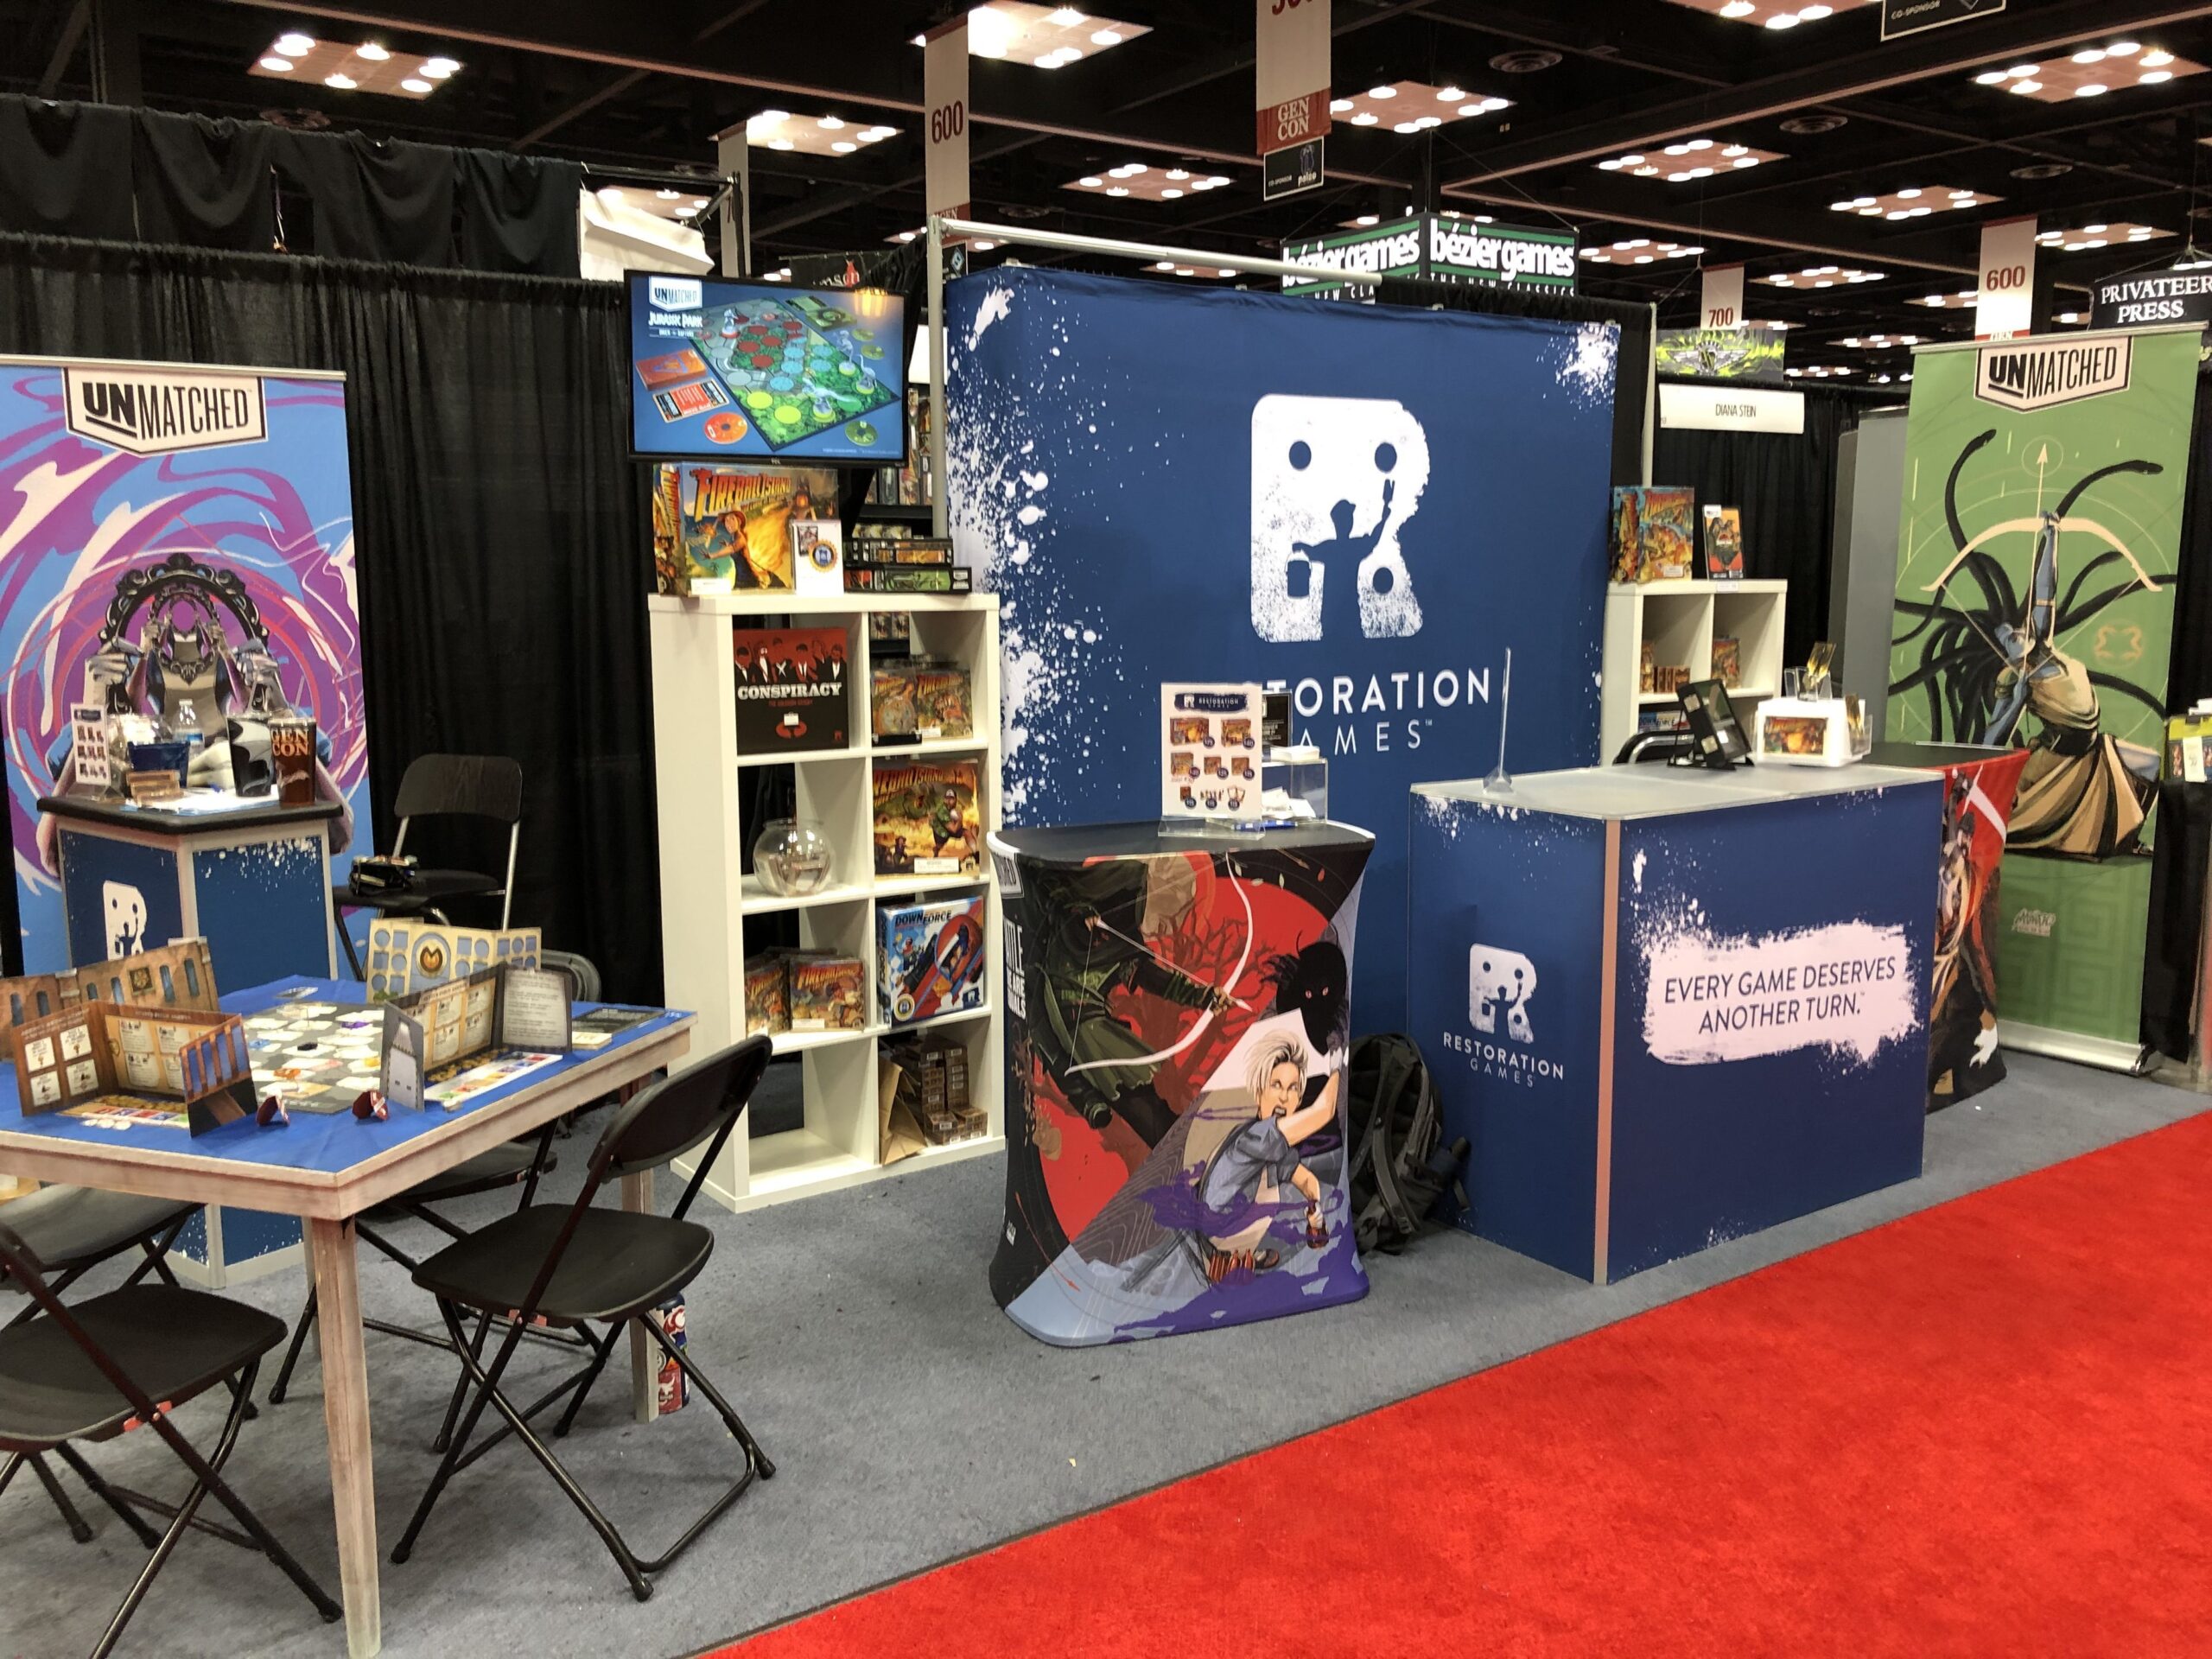 The Show: Our Gen Con 2019 Wrap-Up